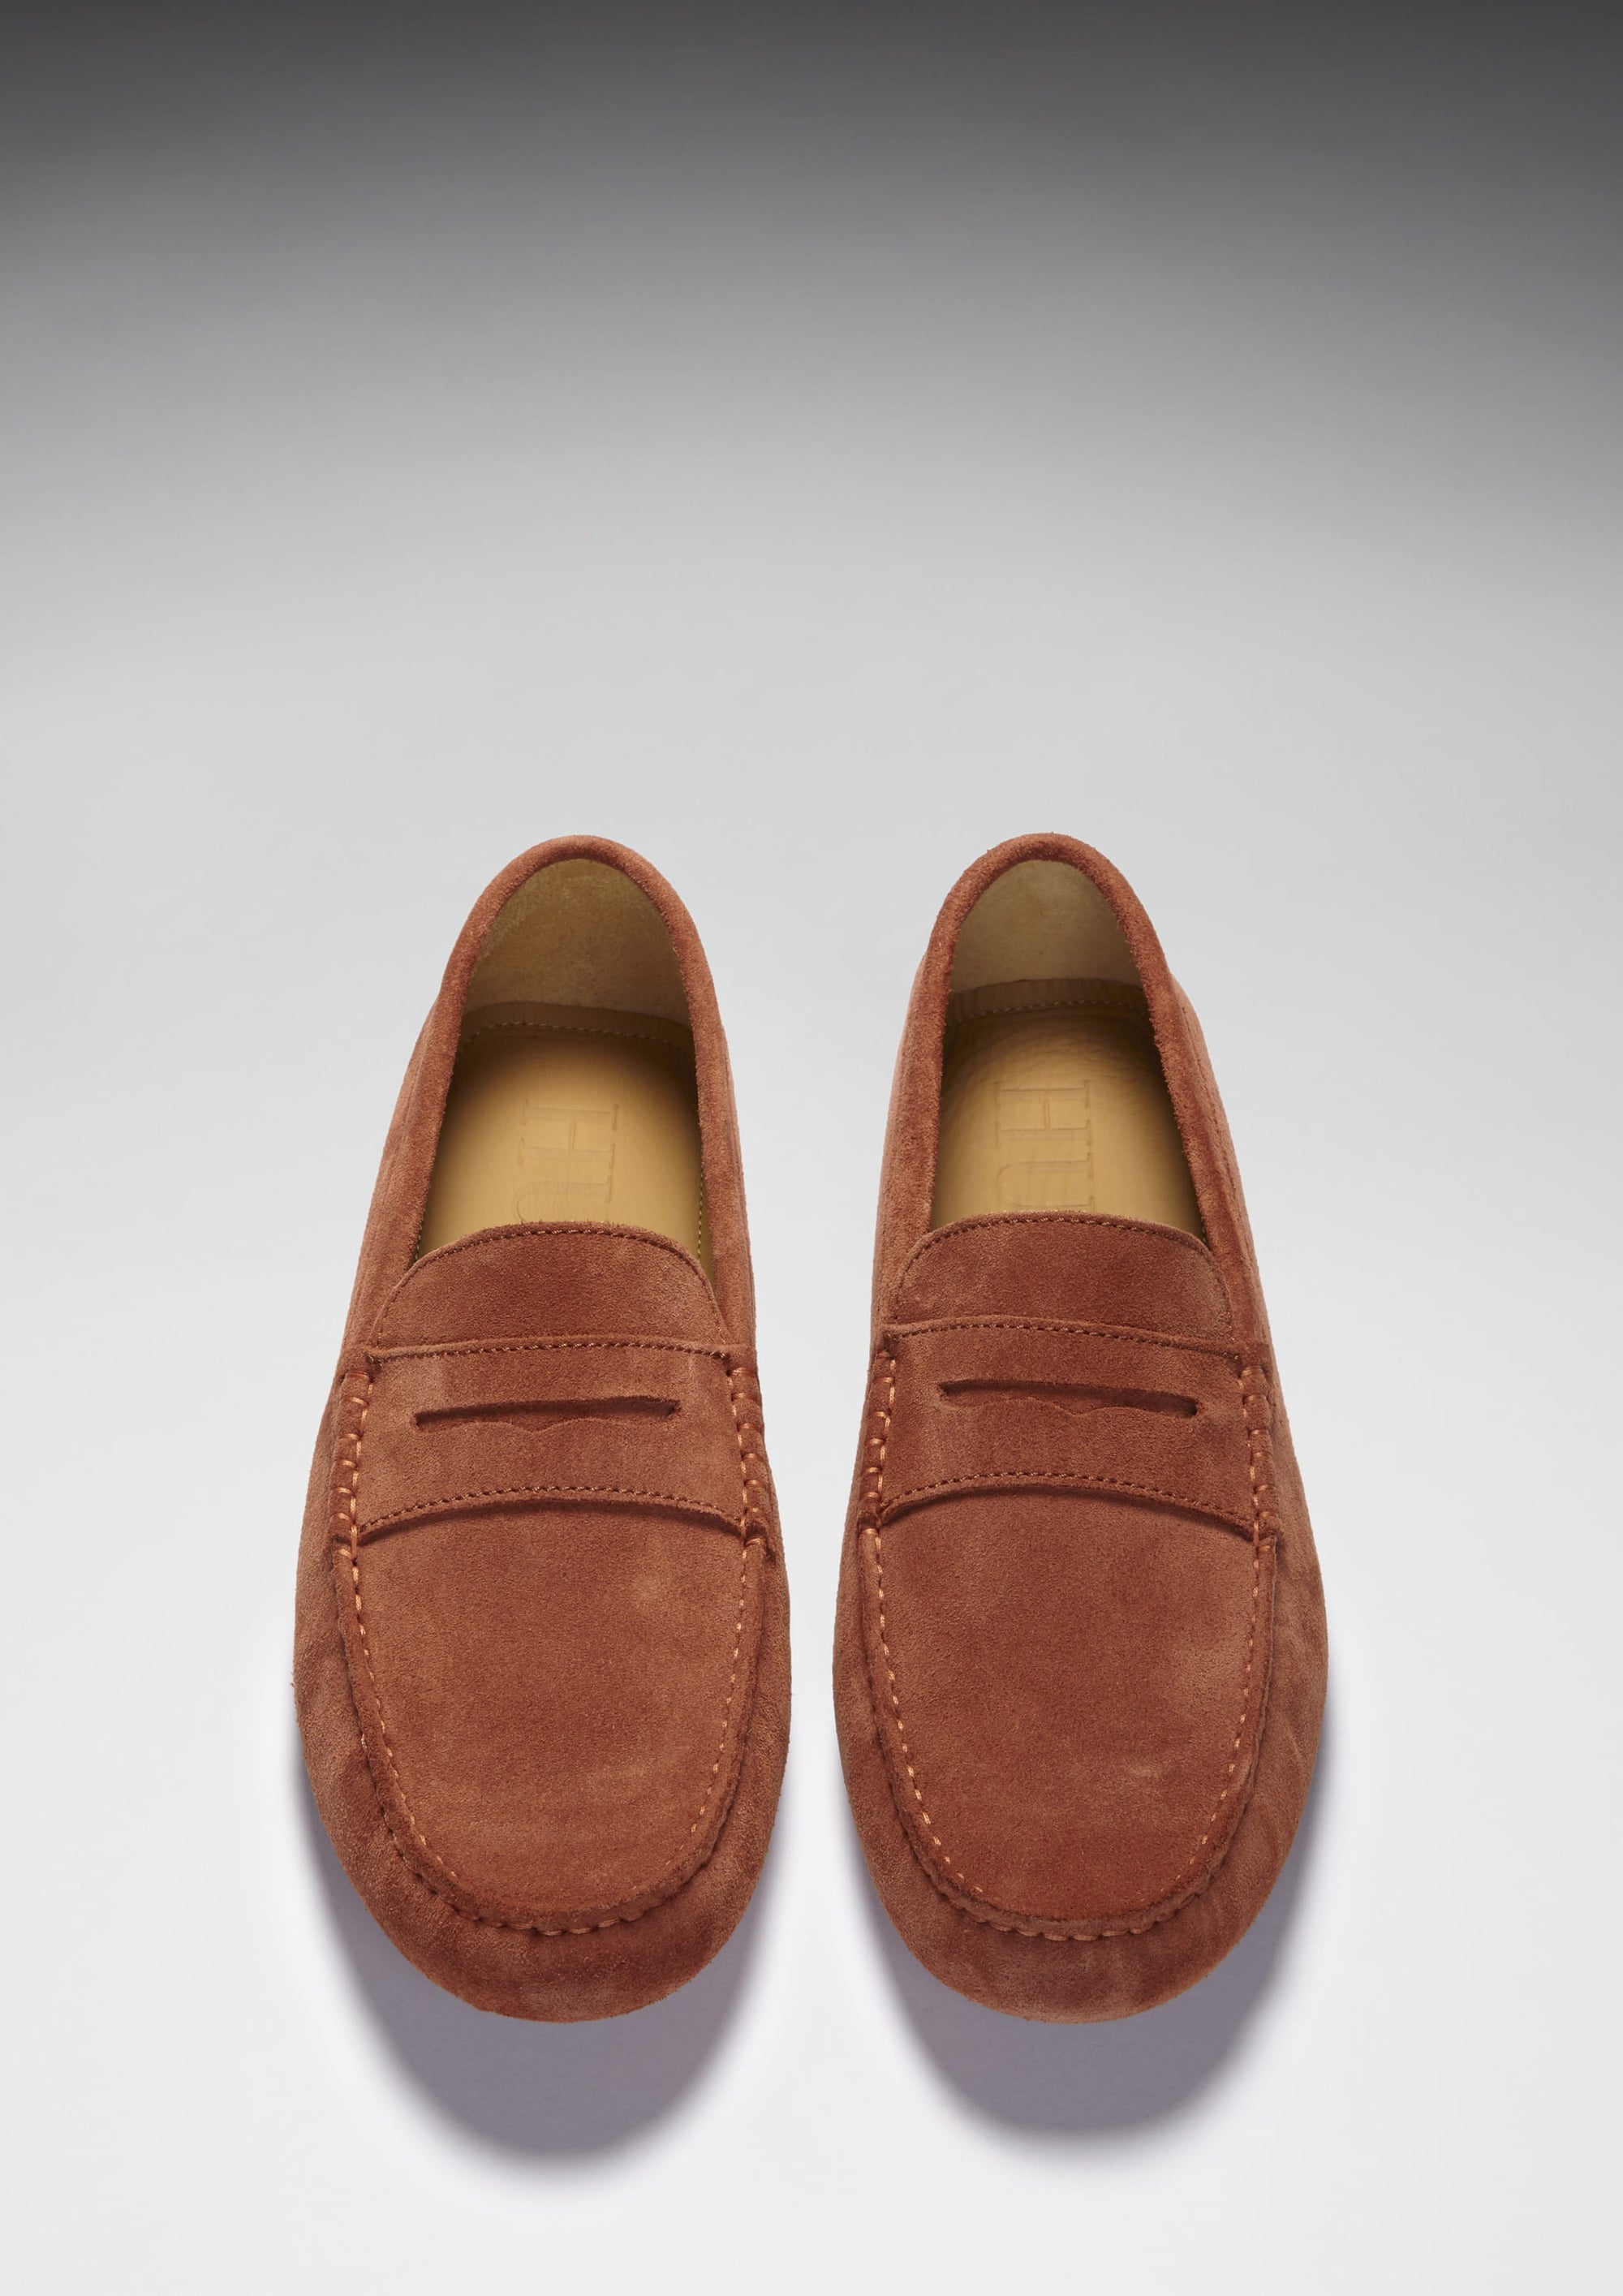 Penny Driving Loafers, rust suede, Hugs & Co.